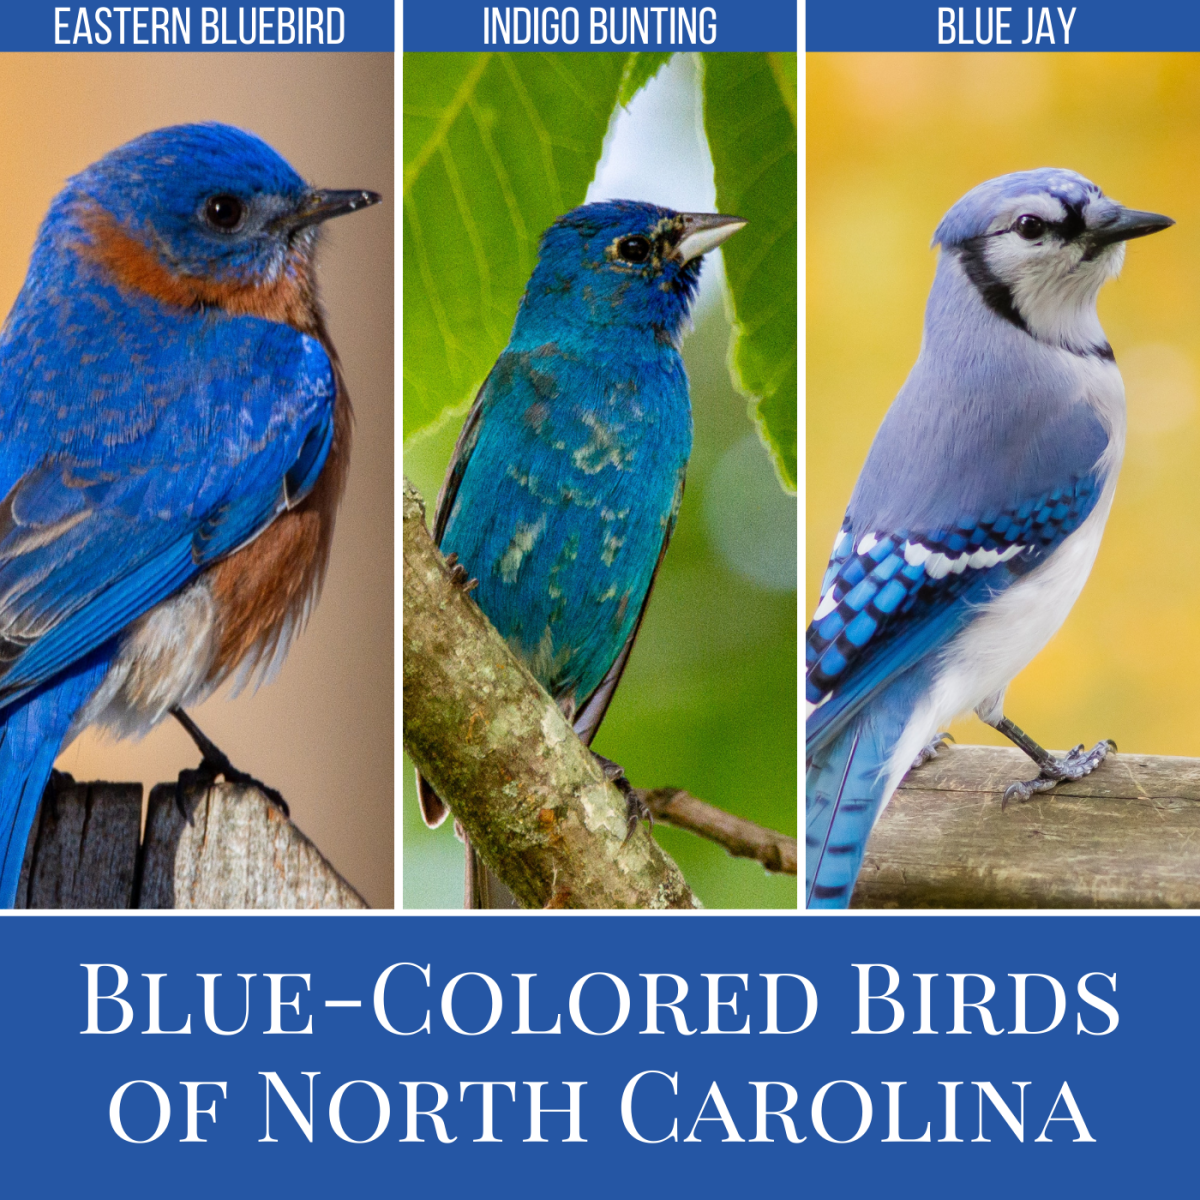 Types of Blue Birds in NC: Bluebirds, Indigo Buntings, and Jays